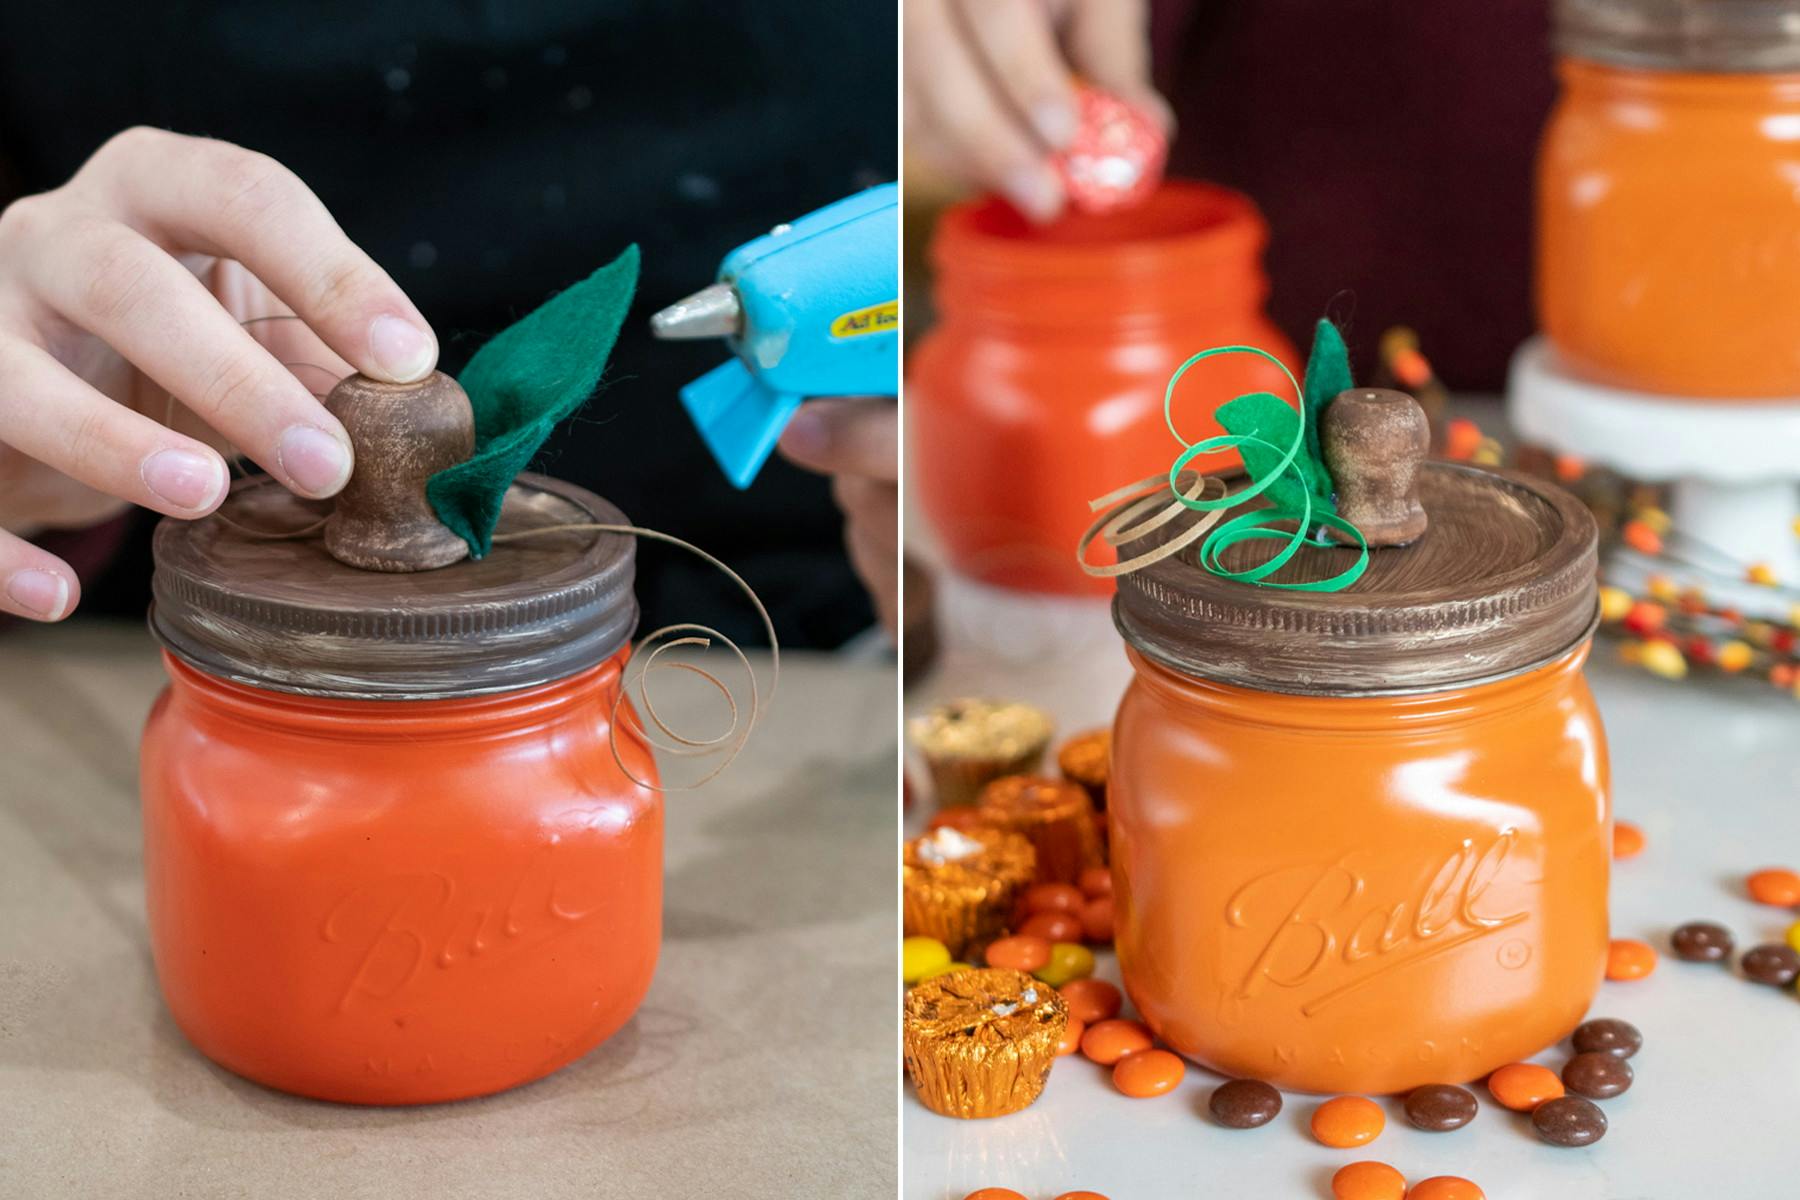 A person placing a knob onto the lid of a mason jar to look like the stem of the pumpkin, and another finished mason jar pumpkin surrounded by candy.